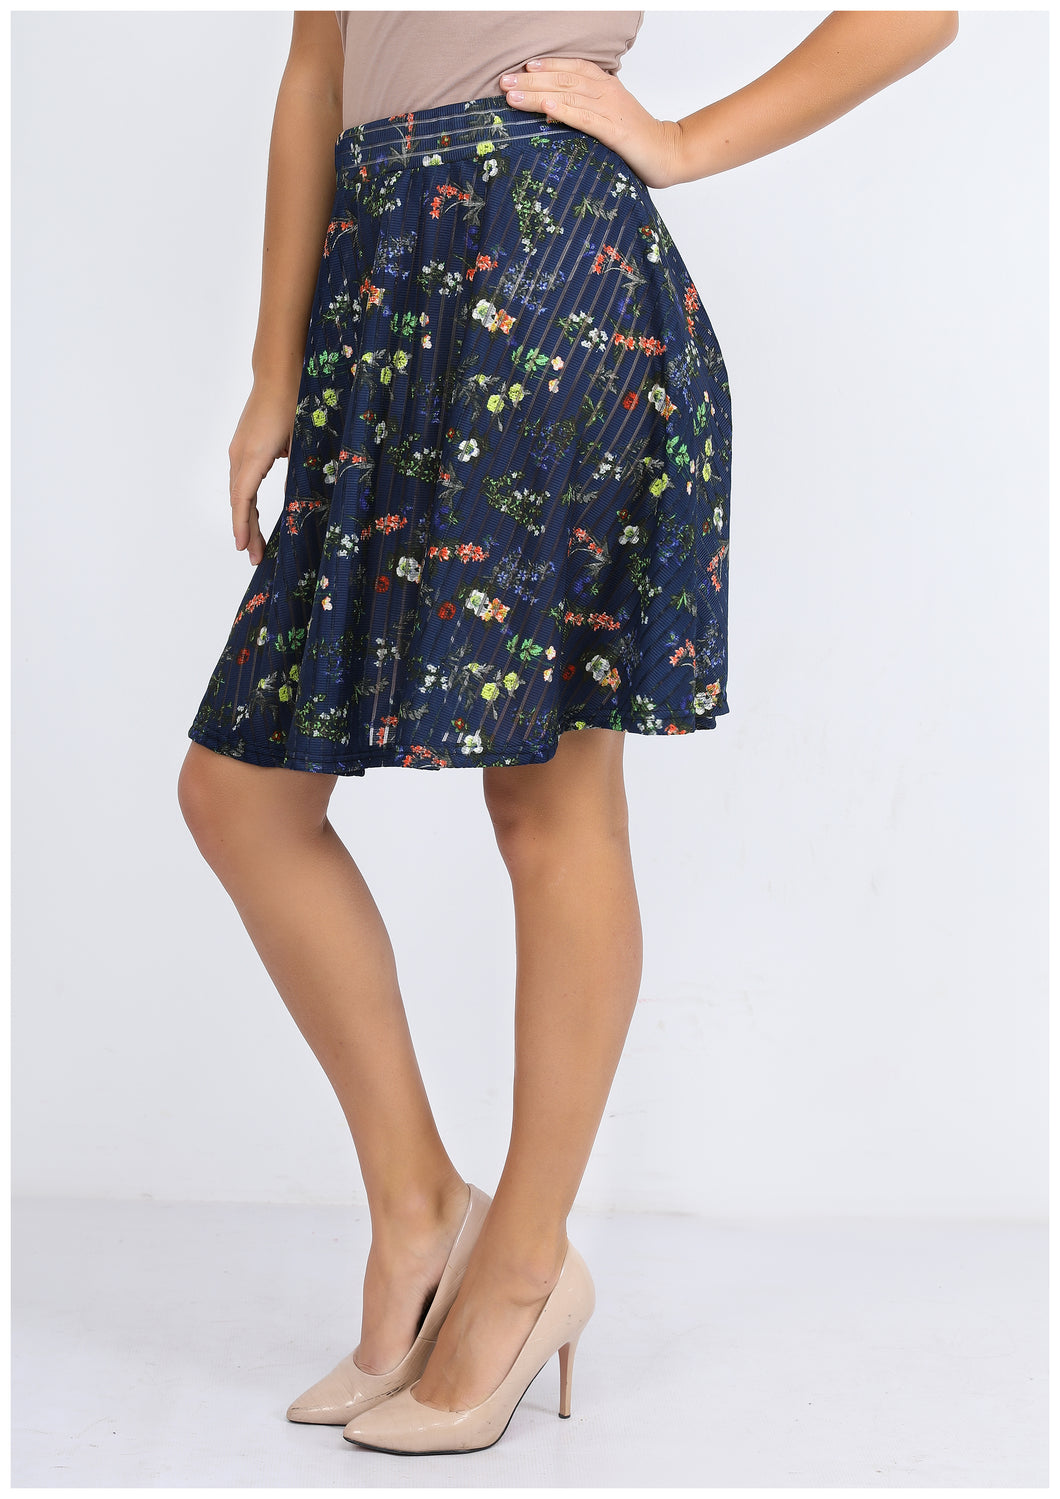 Blue navy skirt with rose patterns